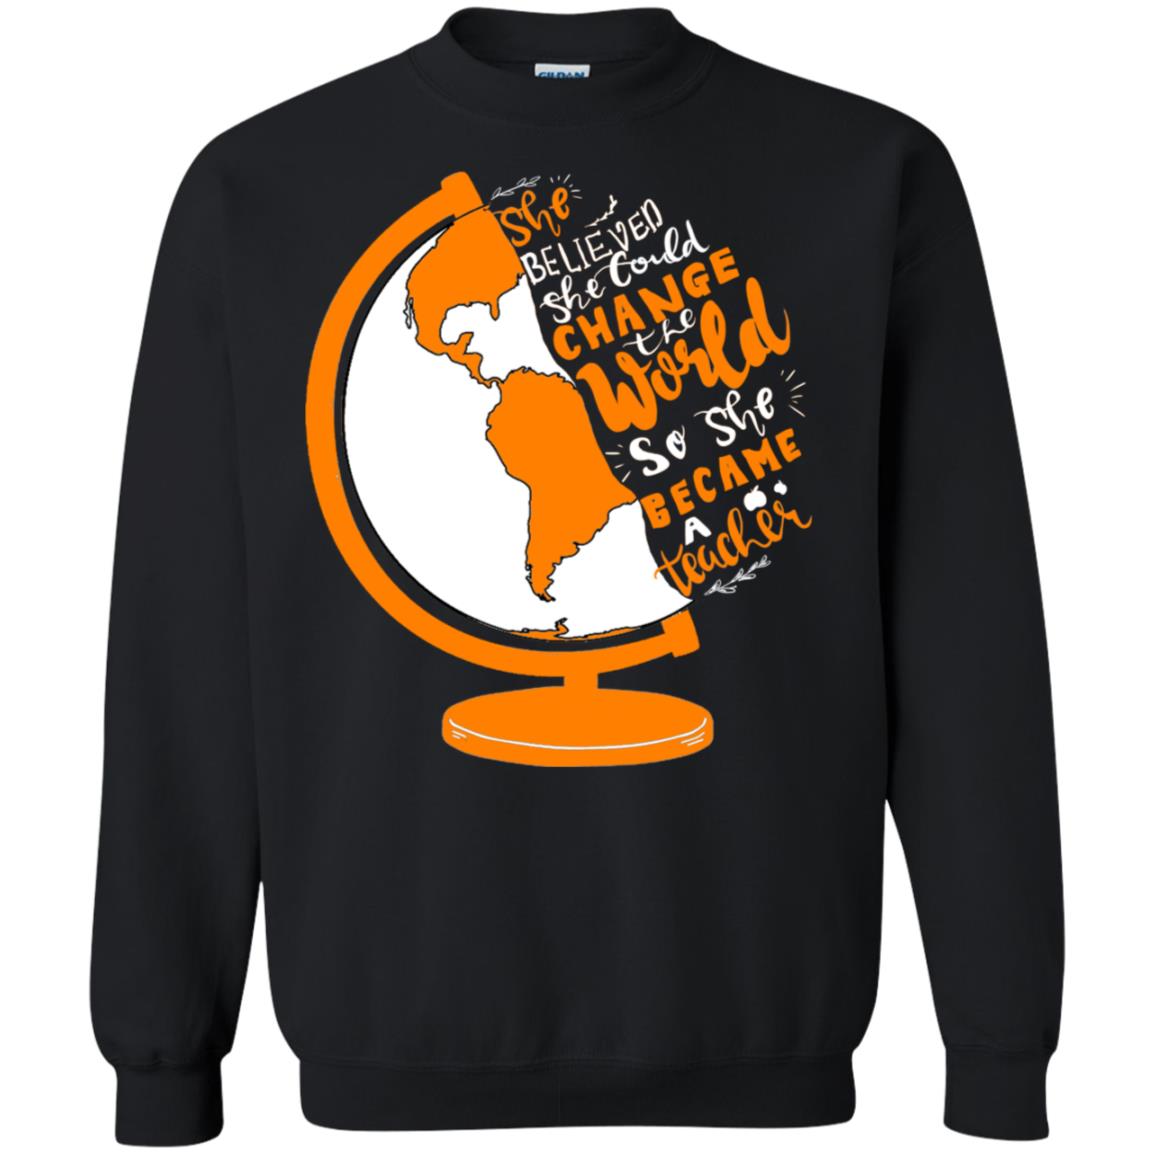 She Believed She Could Change The World So She Became A Teacher Best Quote ShirtG180 Gildan Crewneck Pullover Sweatshirt 8 oz.